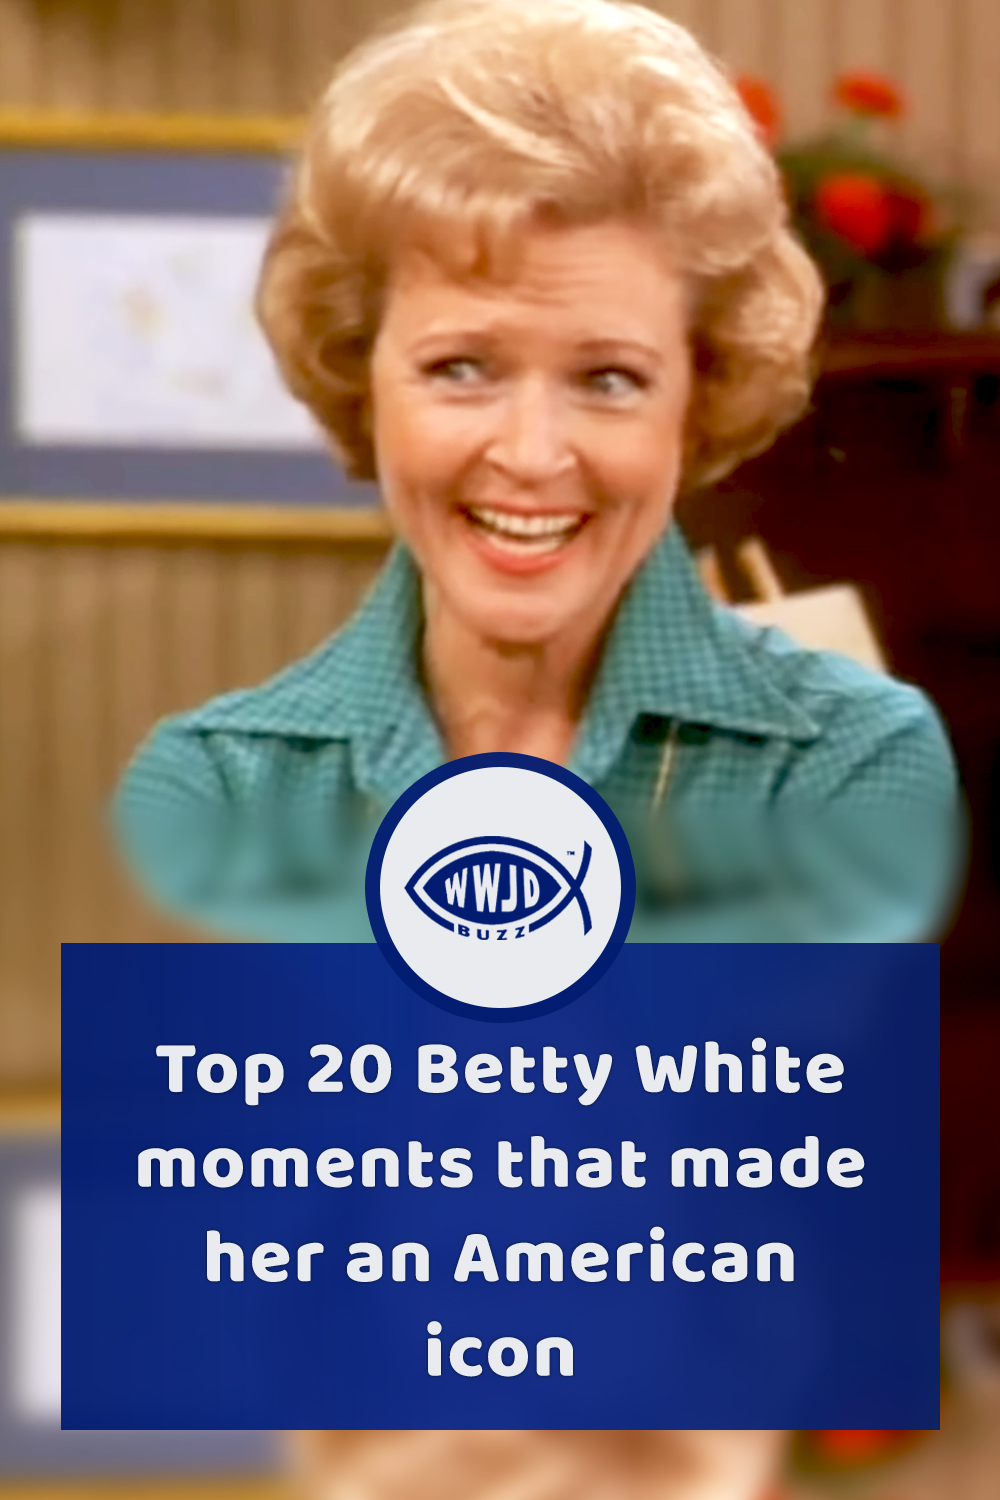 Top 20 Betty White moments that made her an American icon.